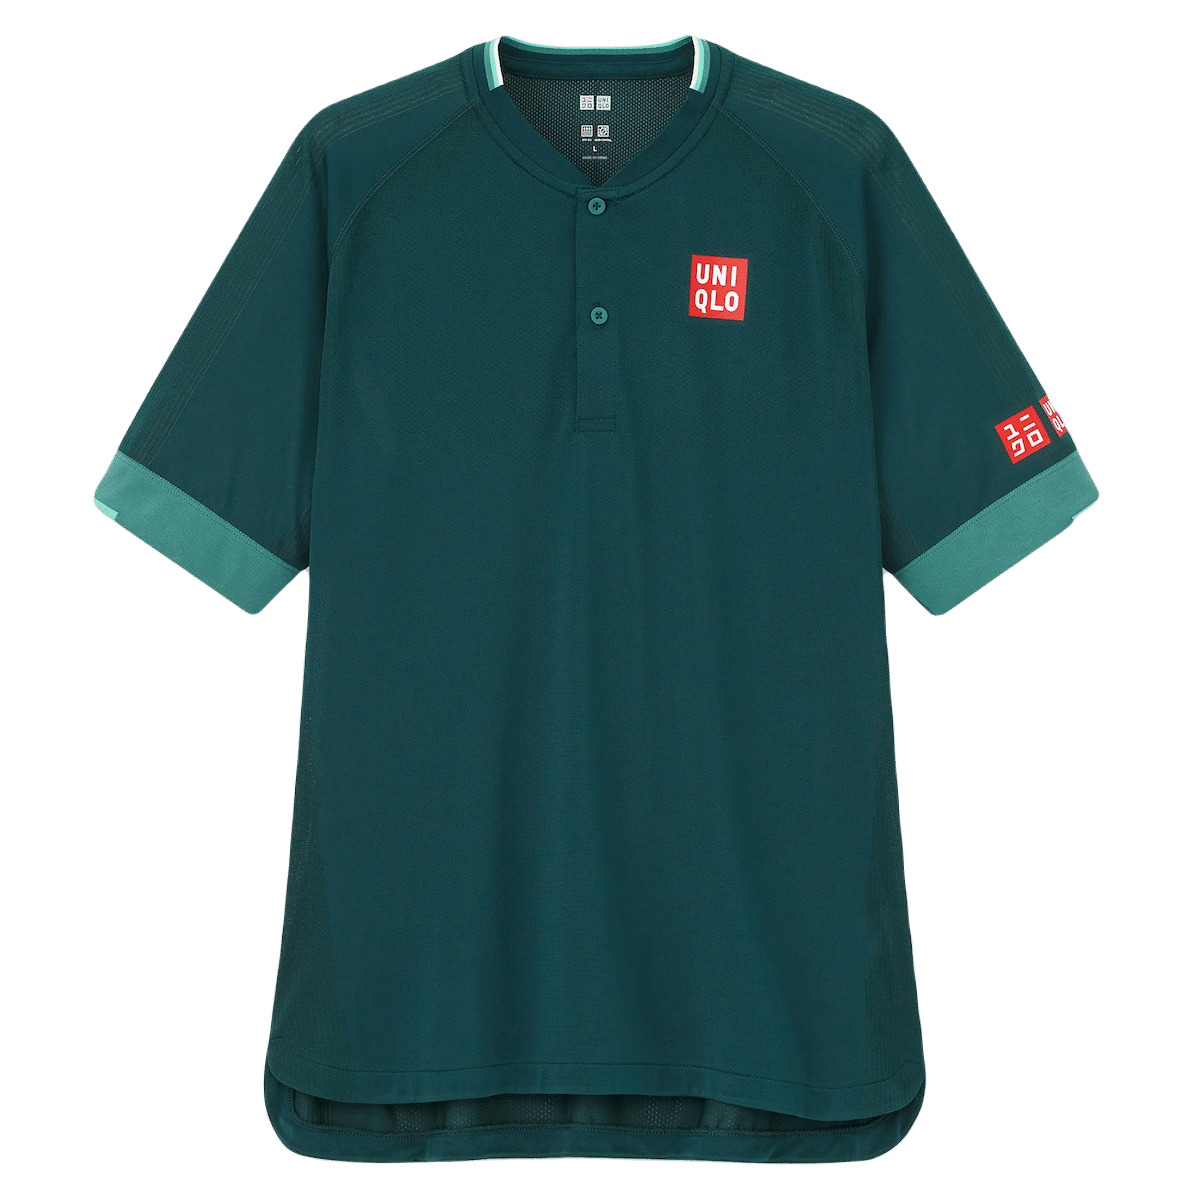 Uniqlo & Roger Federer Qatar Open Tennis Men's T-shirt Polo | Small | New Tags